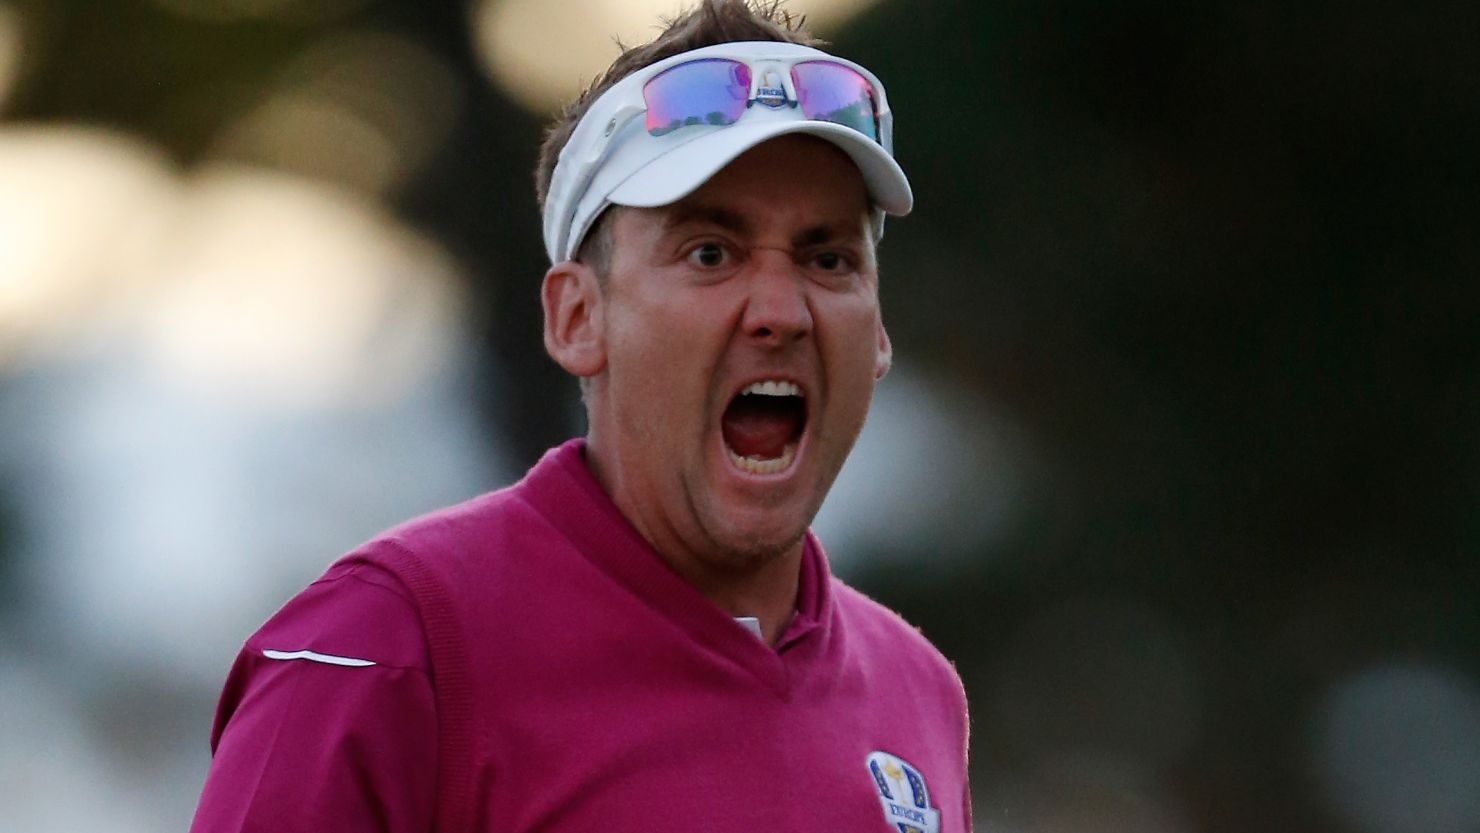 Ian Poulter kept Europe clinging on in their Ryder Cup battle with the United States in Chicago.